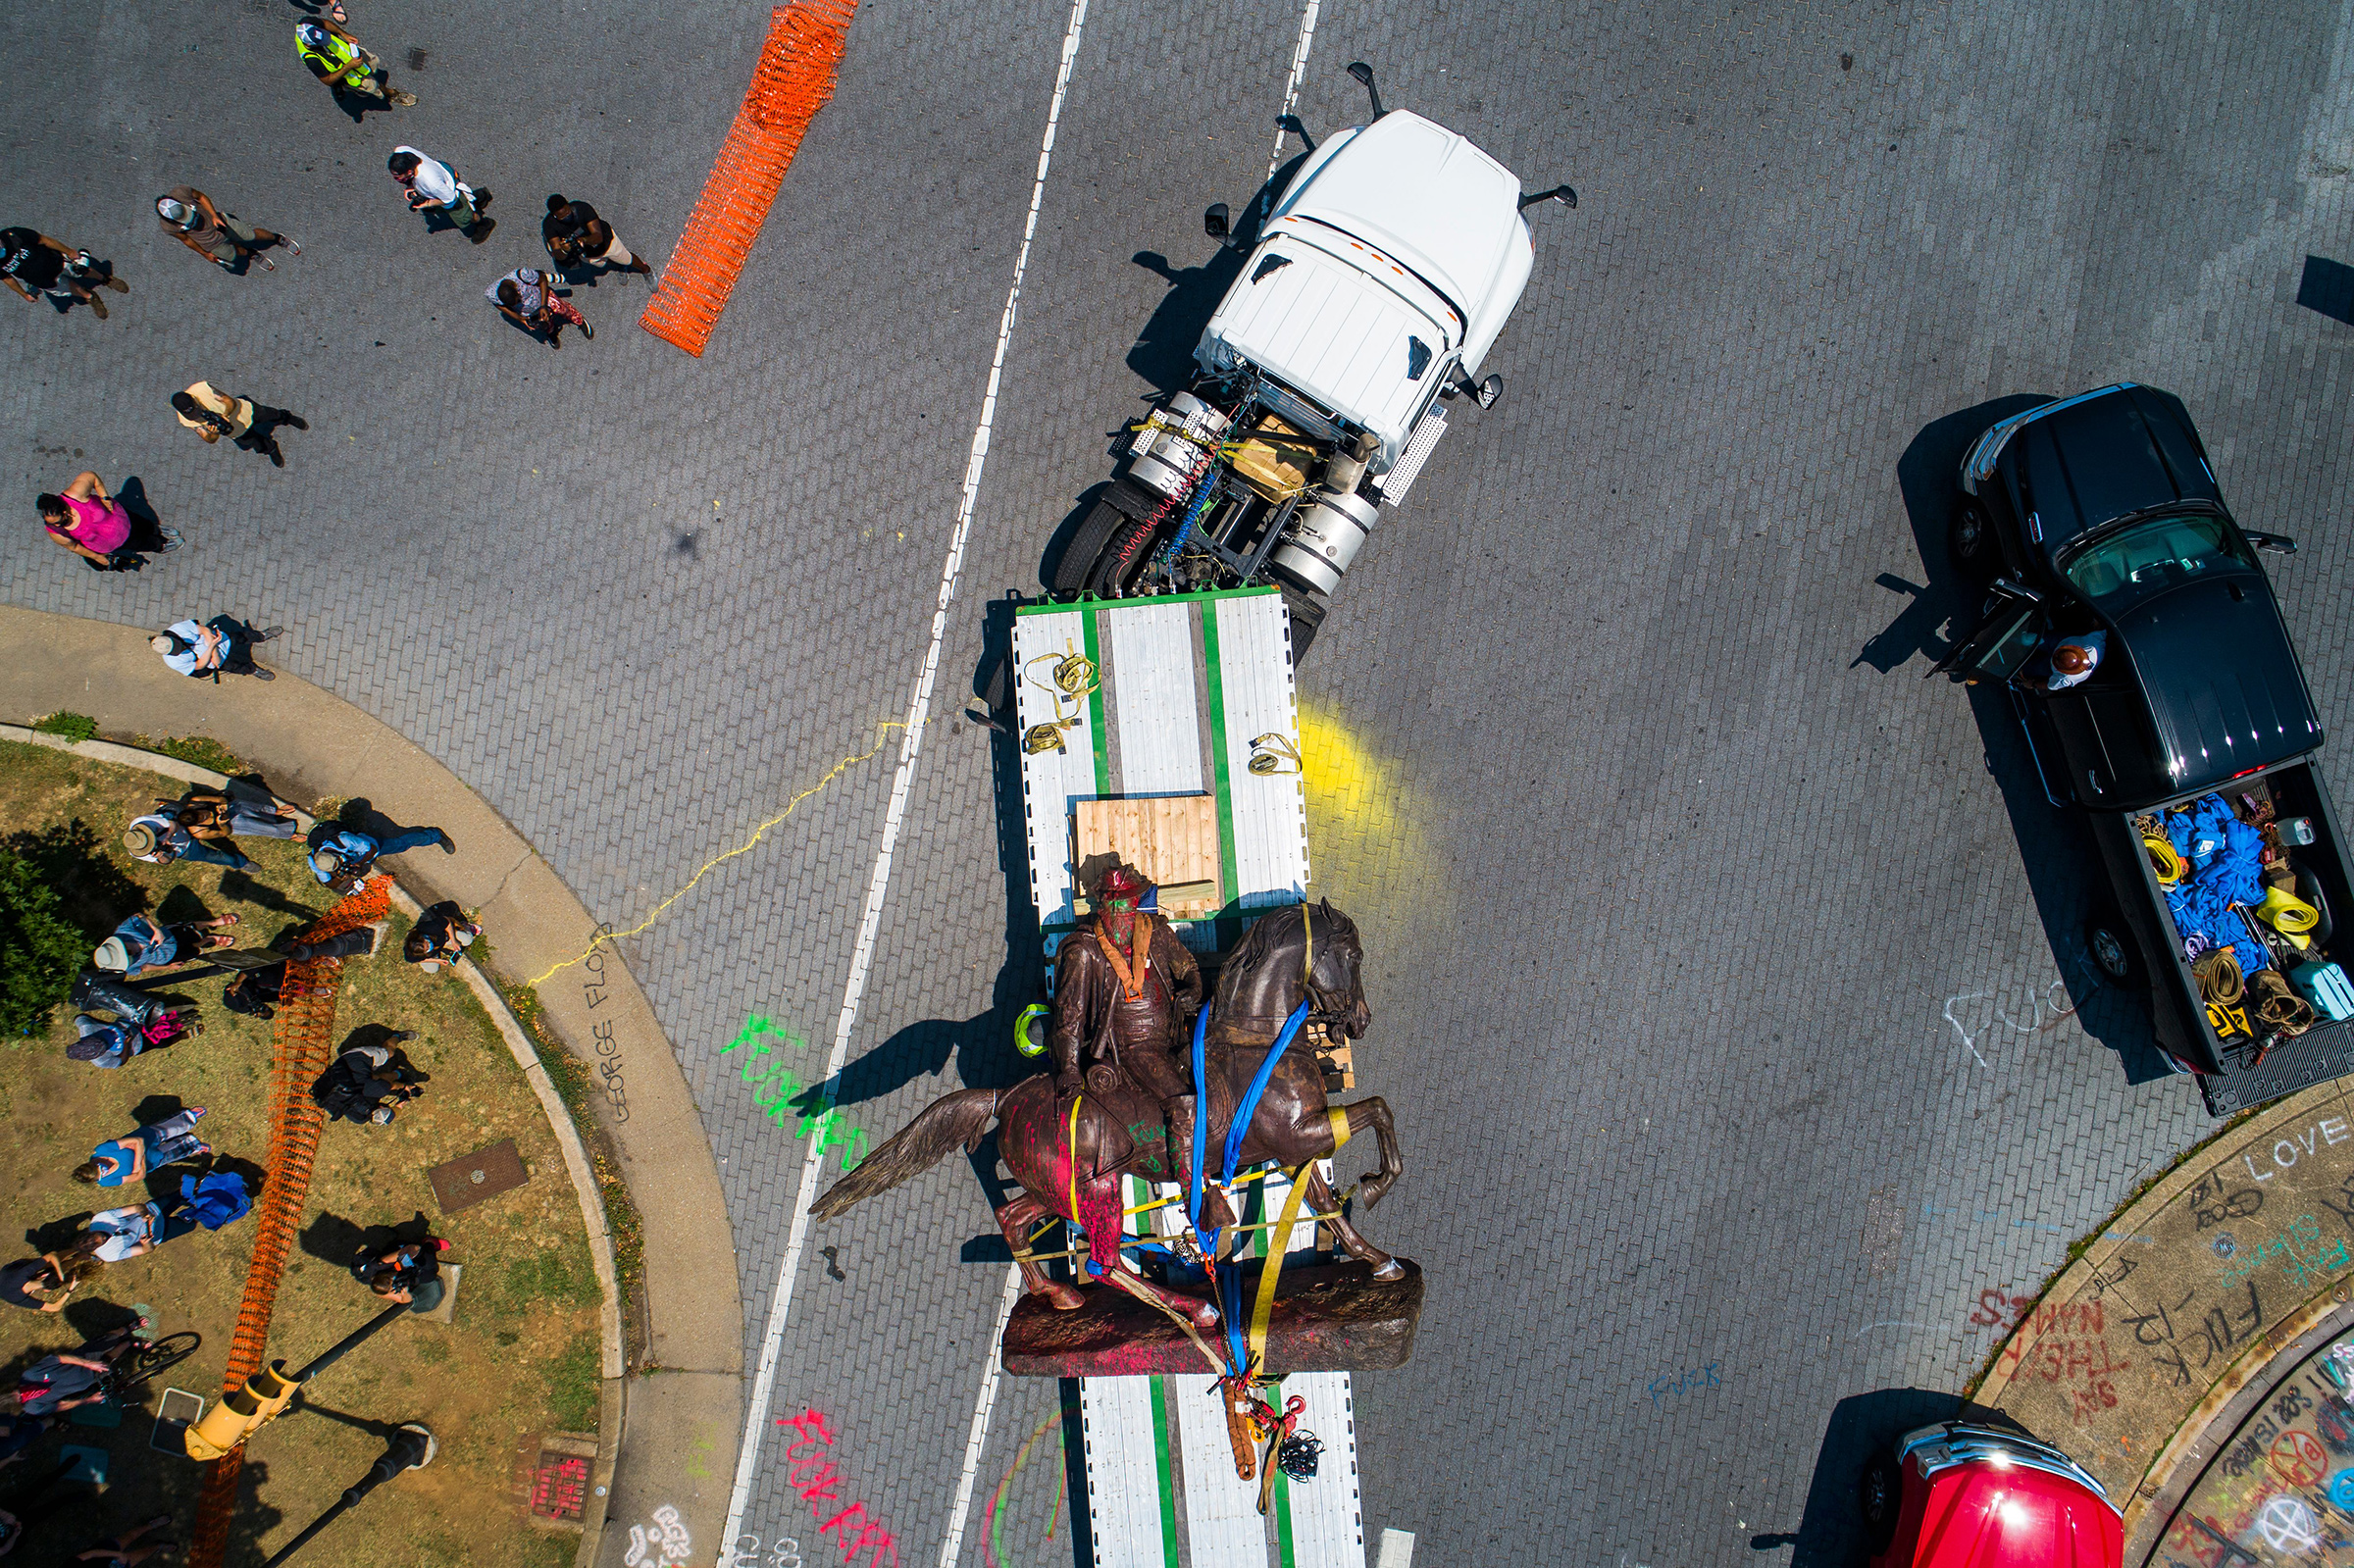 An aerial view from a drone shows workers removing a statue of Confederate General J.E.B. Stuart from Monument Avenue in Richmond, Va., on July 7. (Jim Lo Scalzo—EPA-EFE/Shutterstock)